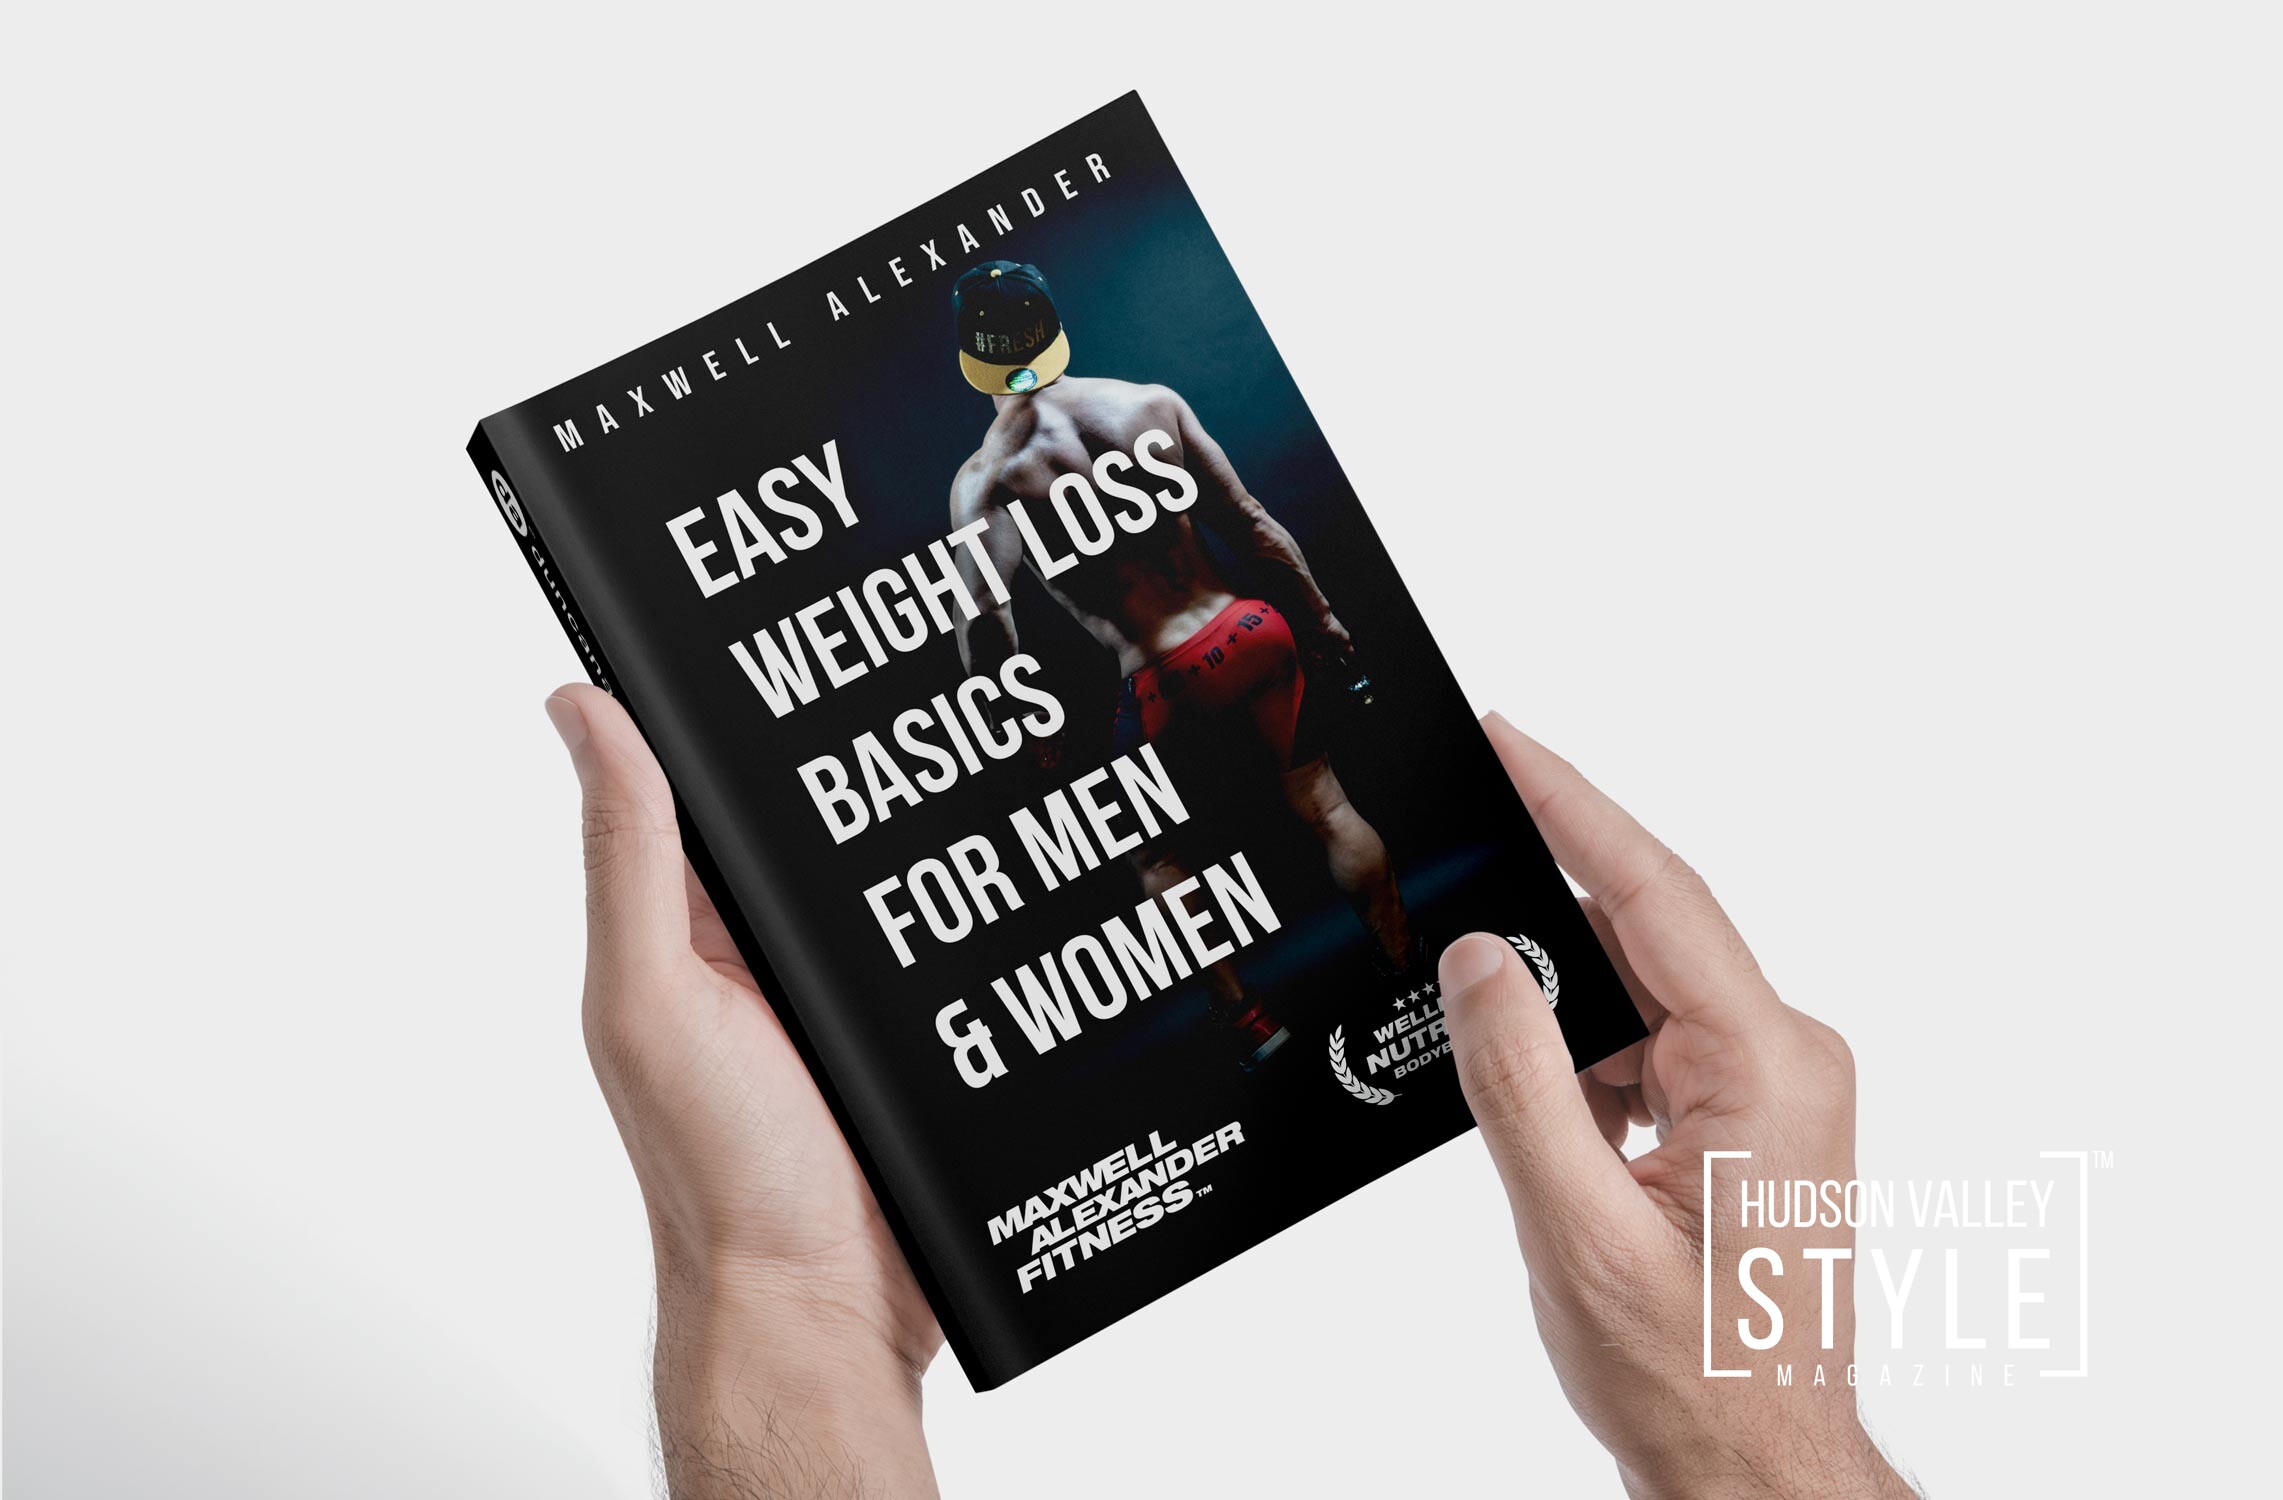 Easy Weight Loss Basics for Men and Women – New Book by Coach Maxwell Alexander